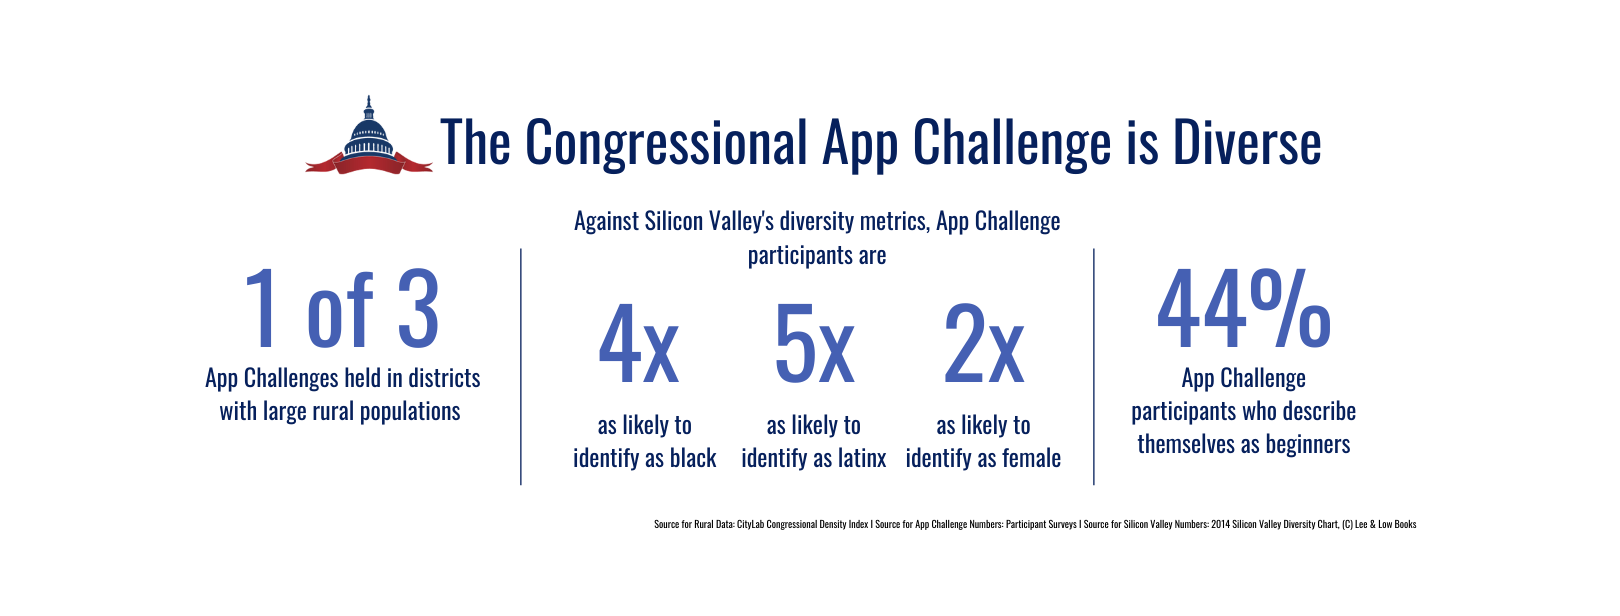 The Congressional App Challenge is Diverse(1)